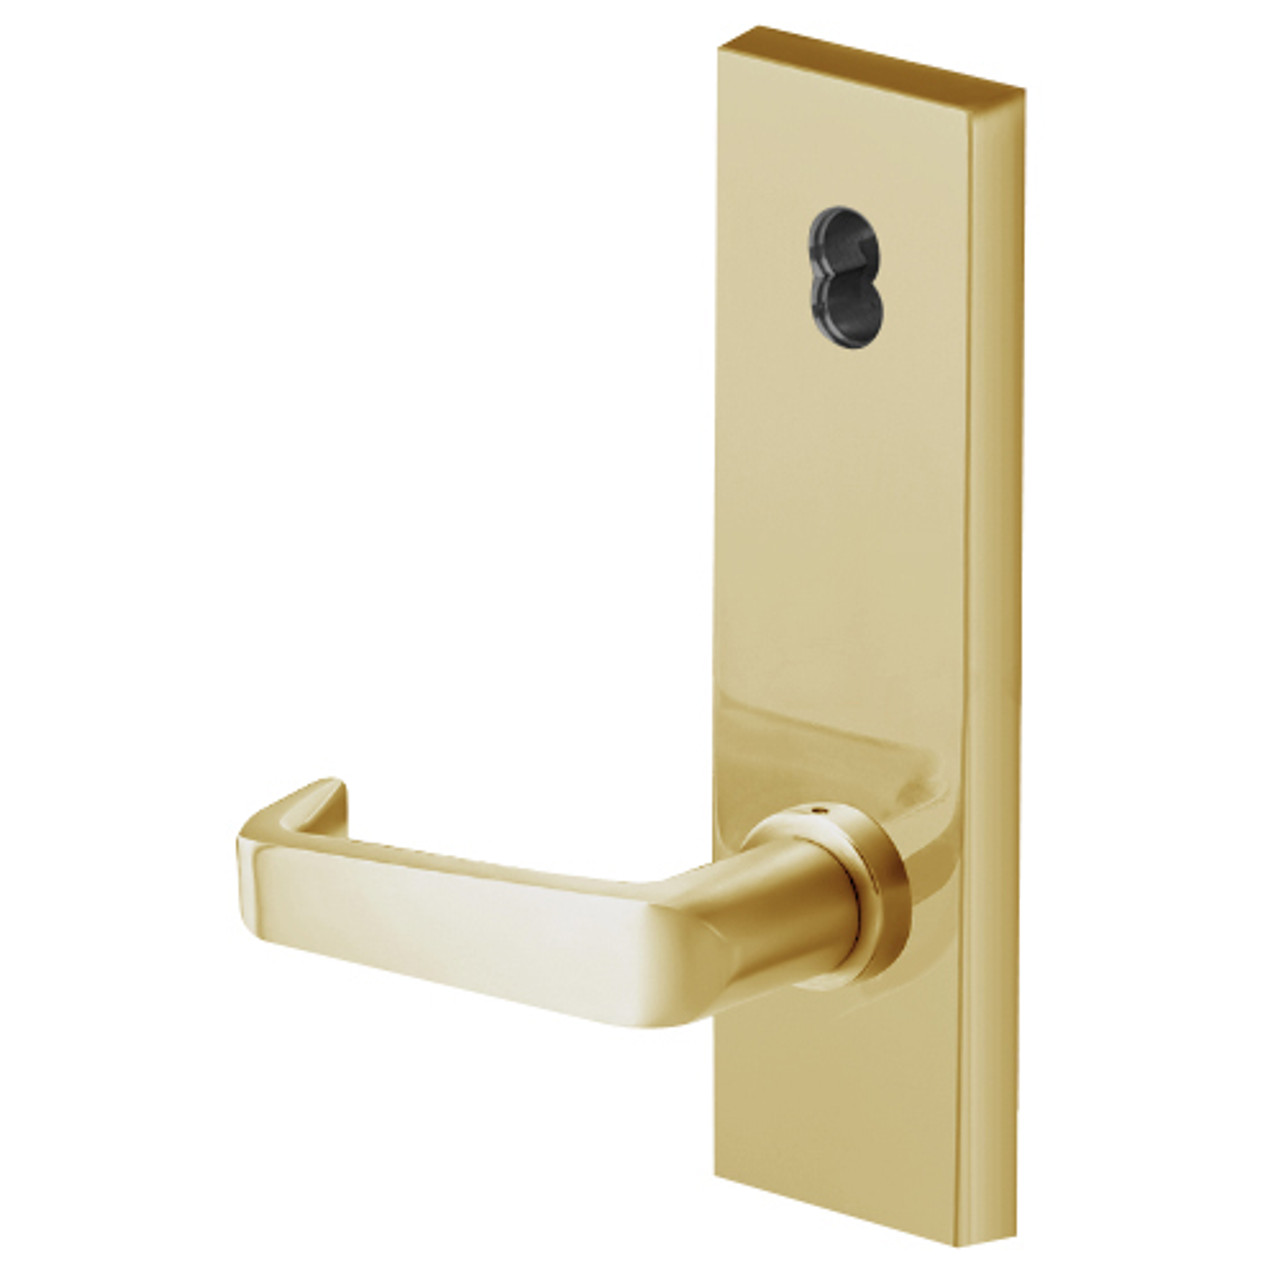 45HW7TWEL15N606 Best 40HW series Double Key Deadbolt Fail Safe Electromechanical Mortise Lever Lock with Contour w/ Angle Return Style in Satin Brass